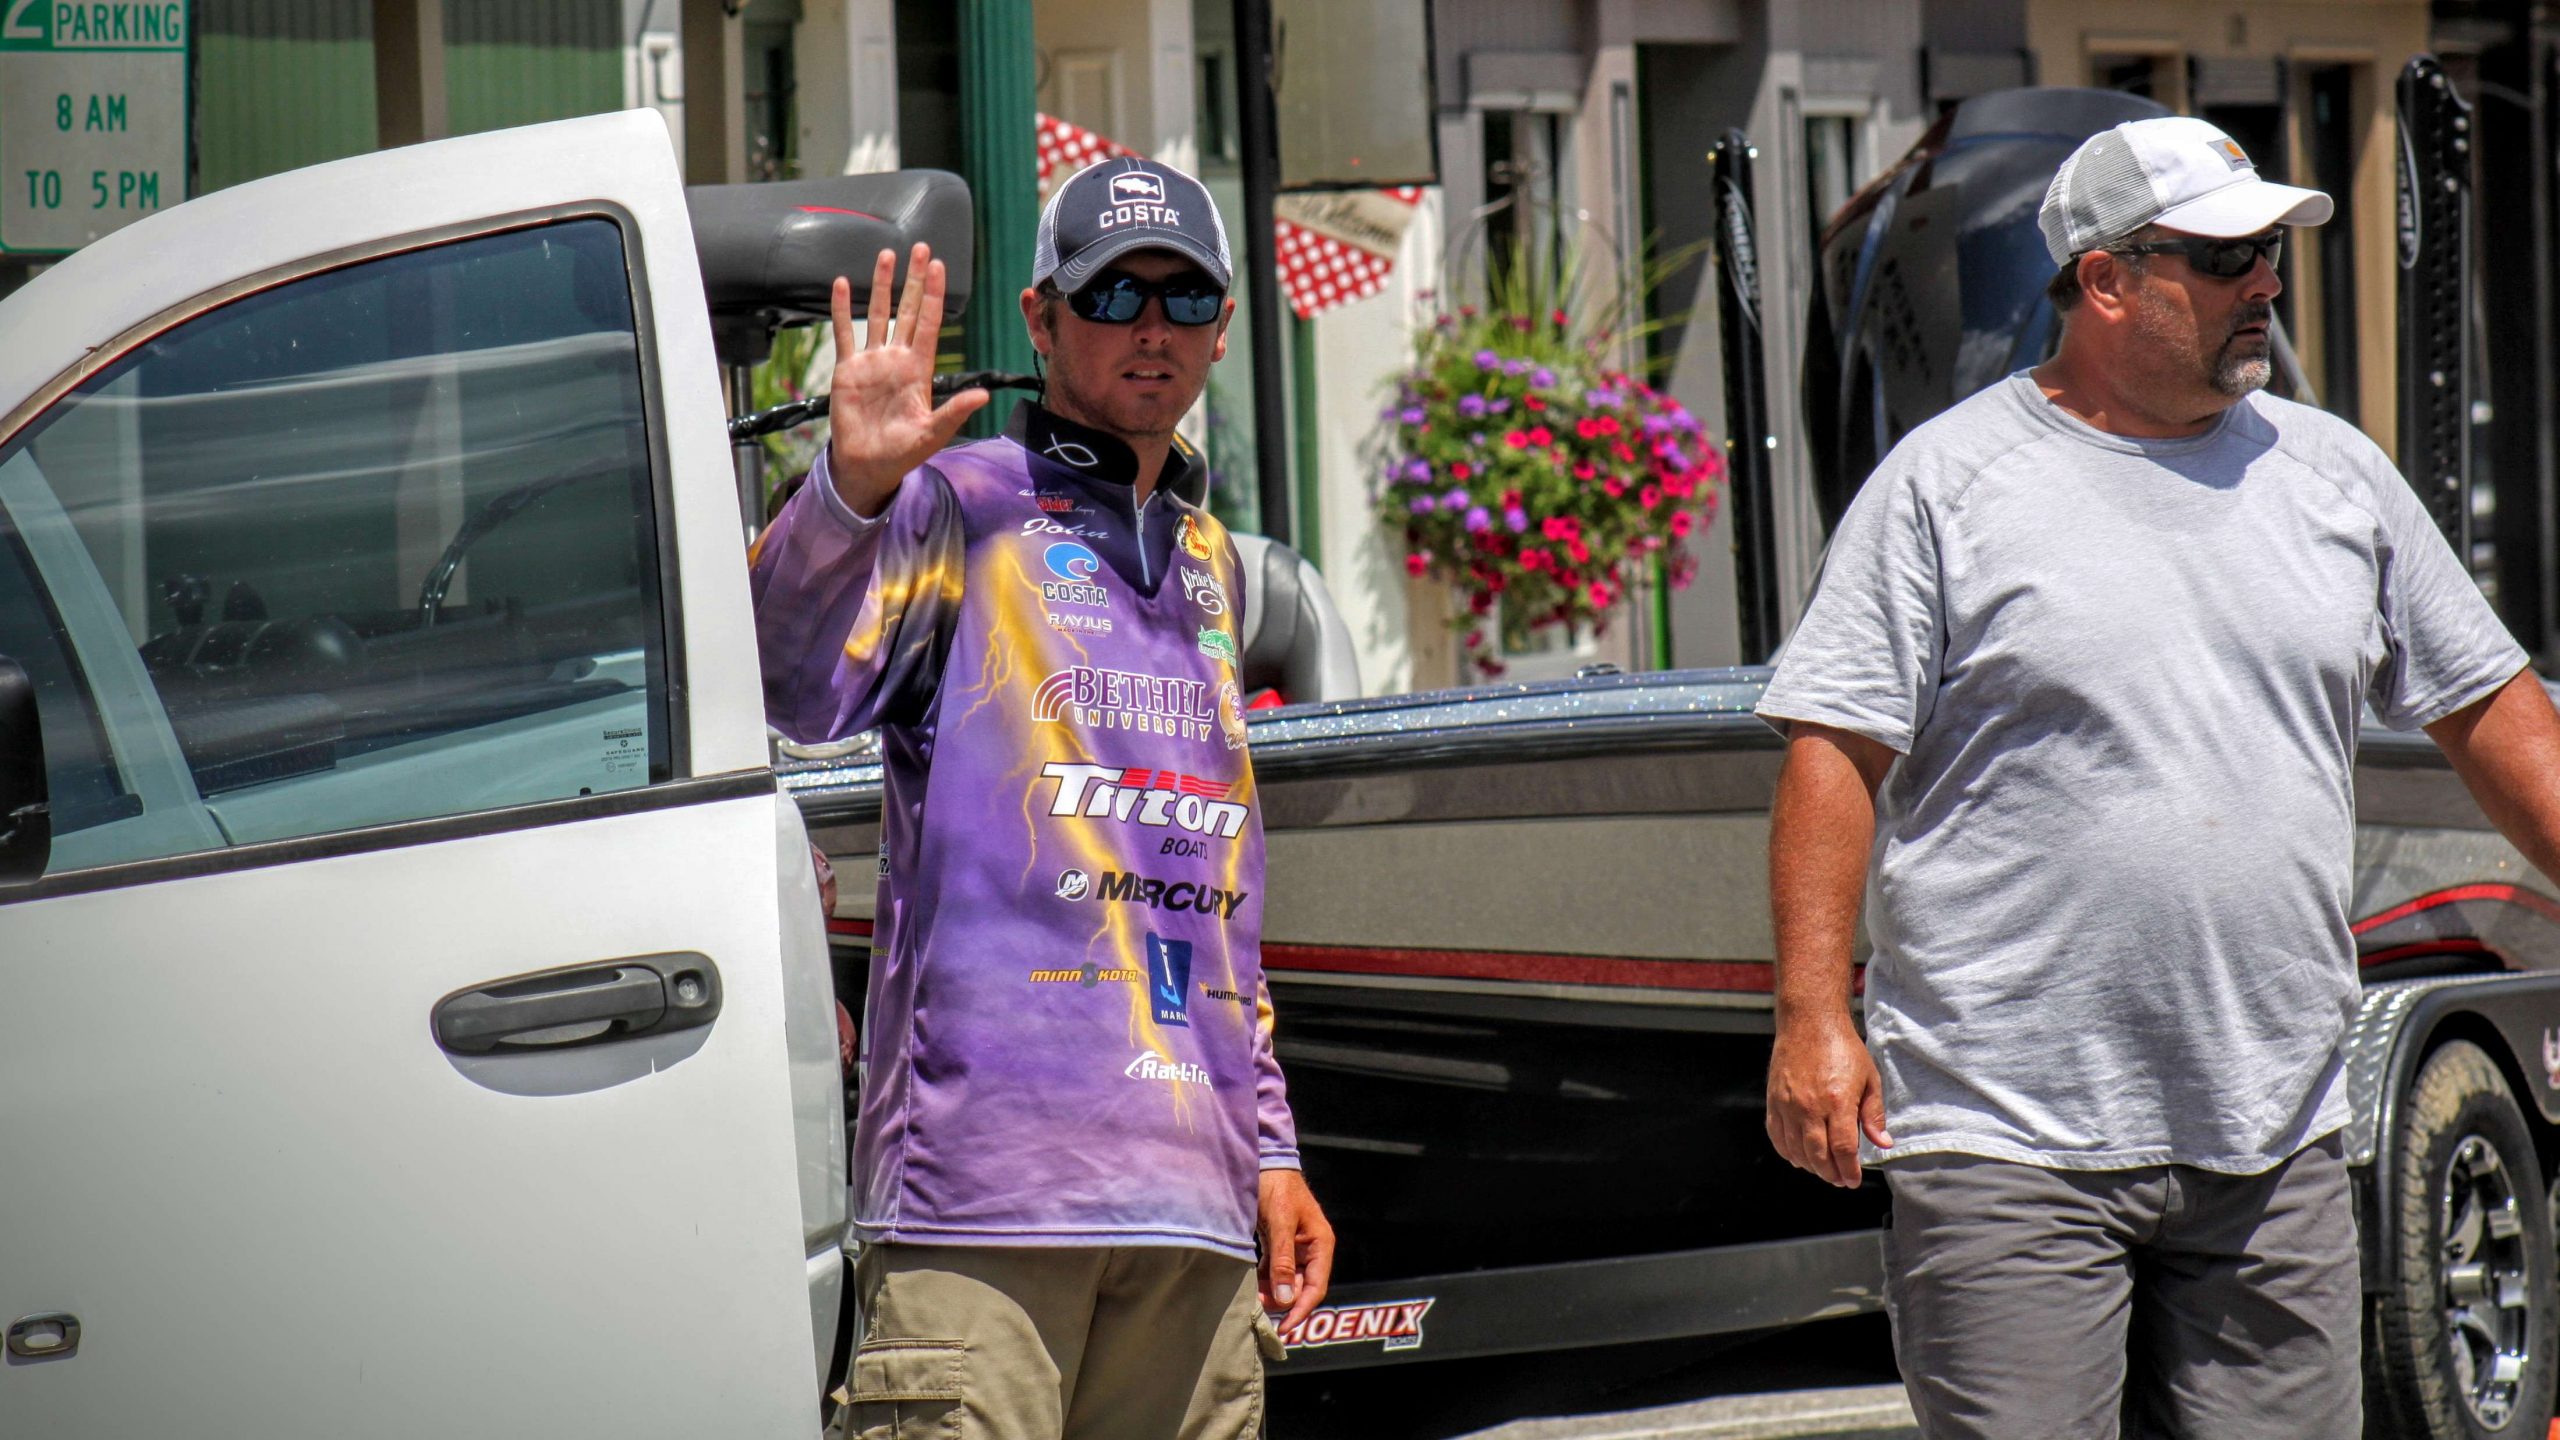 But the crowd waiting on the anglers to take the stage doesnât know that yet. Garrett spots some friends and gives them a wave.